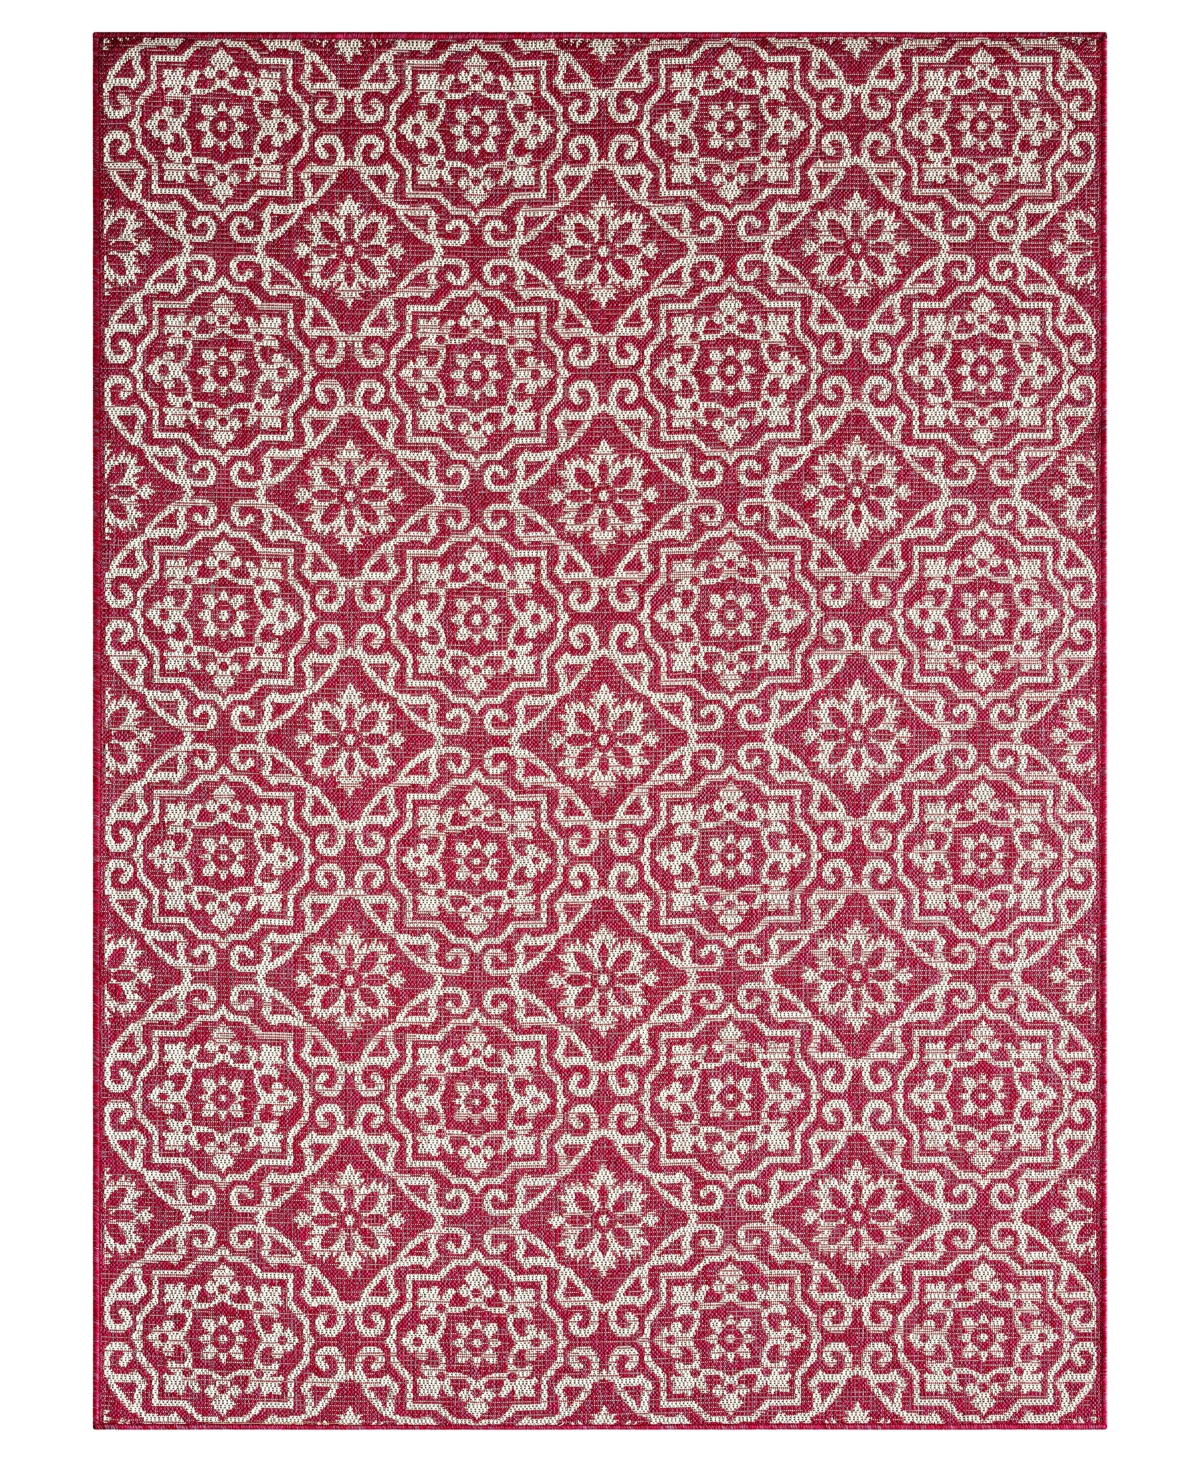 Nicole Miller Patio Country Danica 7'9" X 10'2" Outdoor Area Rug In Red